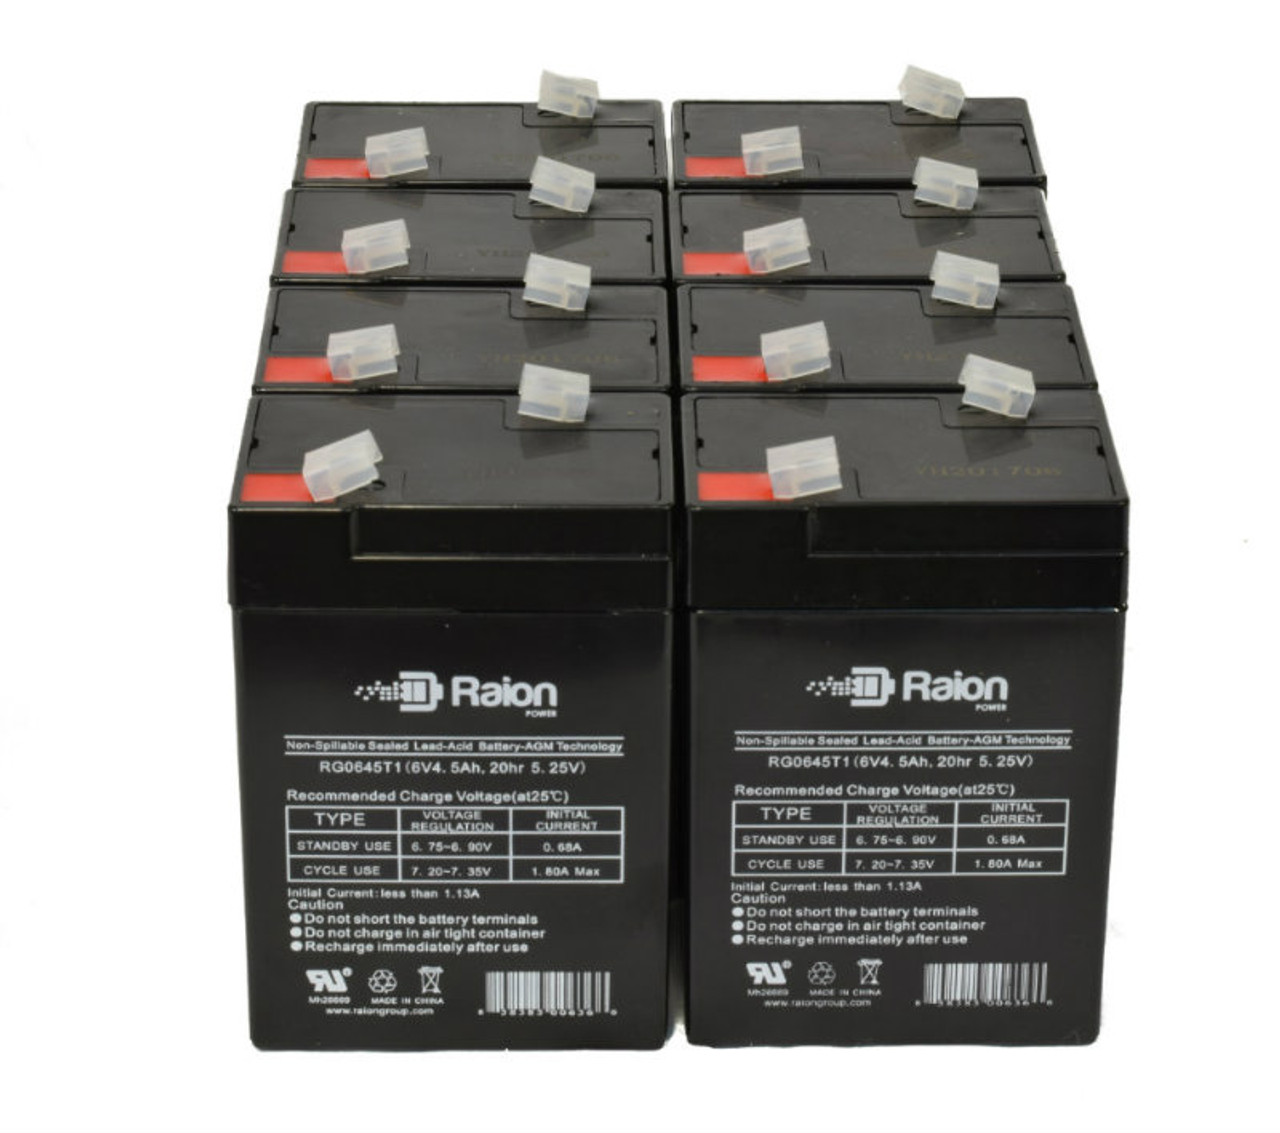 Raion Power 6V 4.5Ah Replacement Emergency Light Battery for Chloride 100-001-0145 - 8 Pack